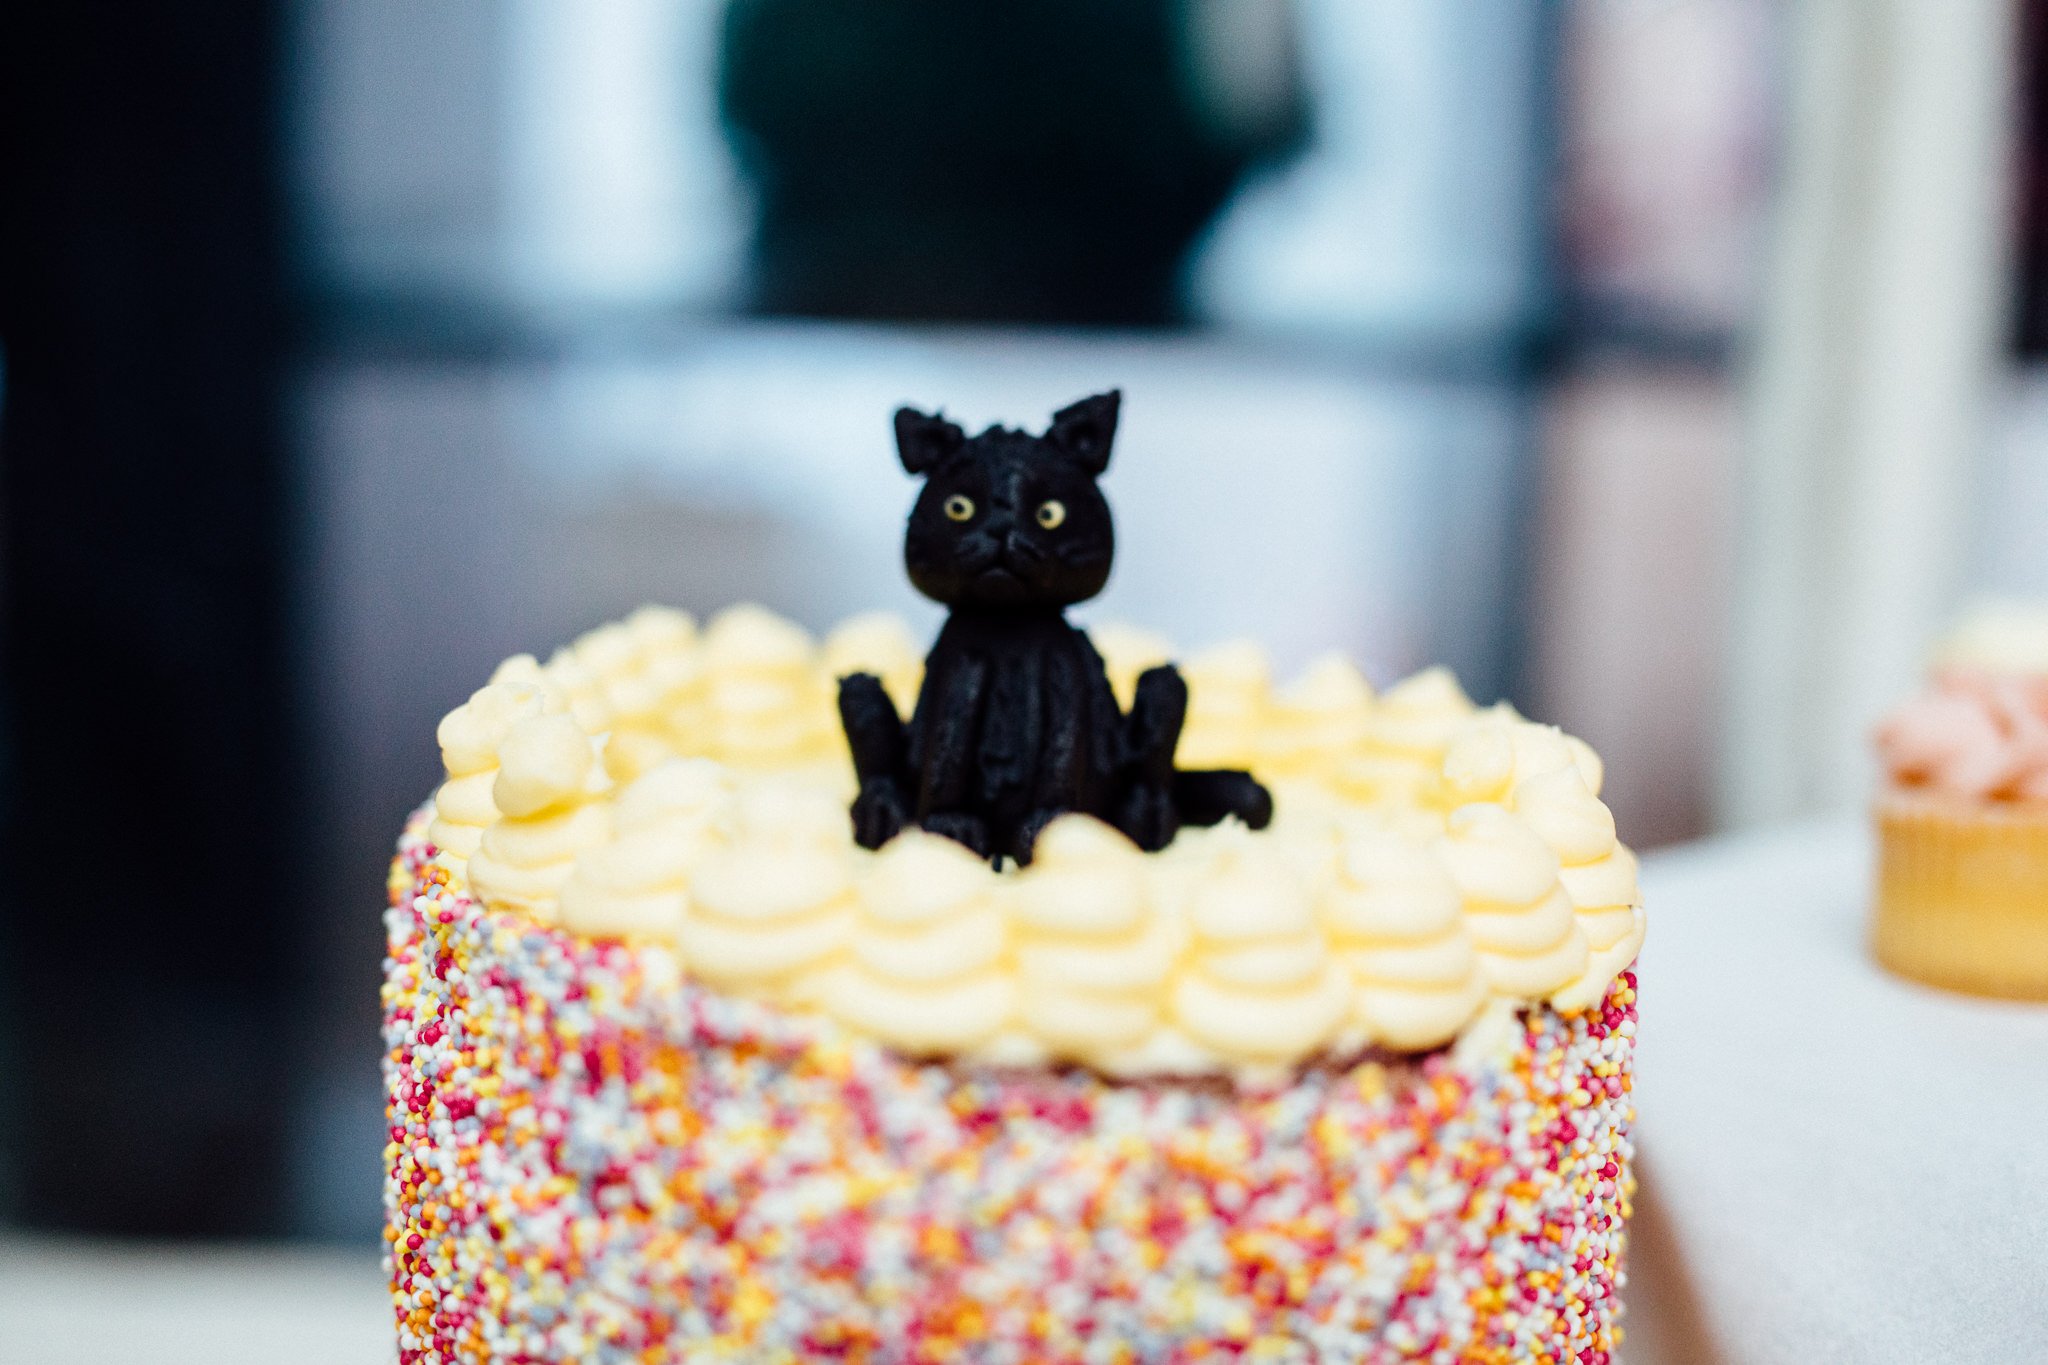  Wedding cake with a cat on top 